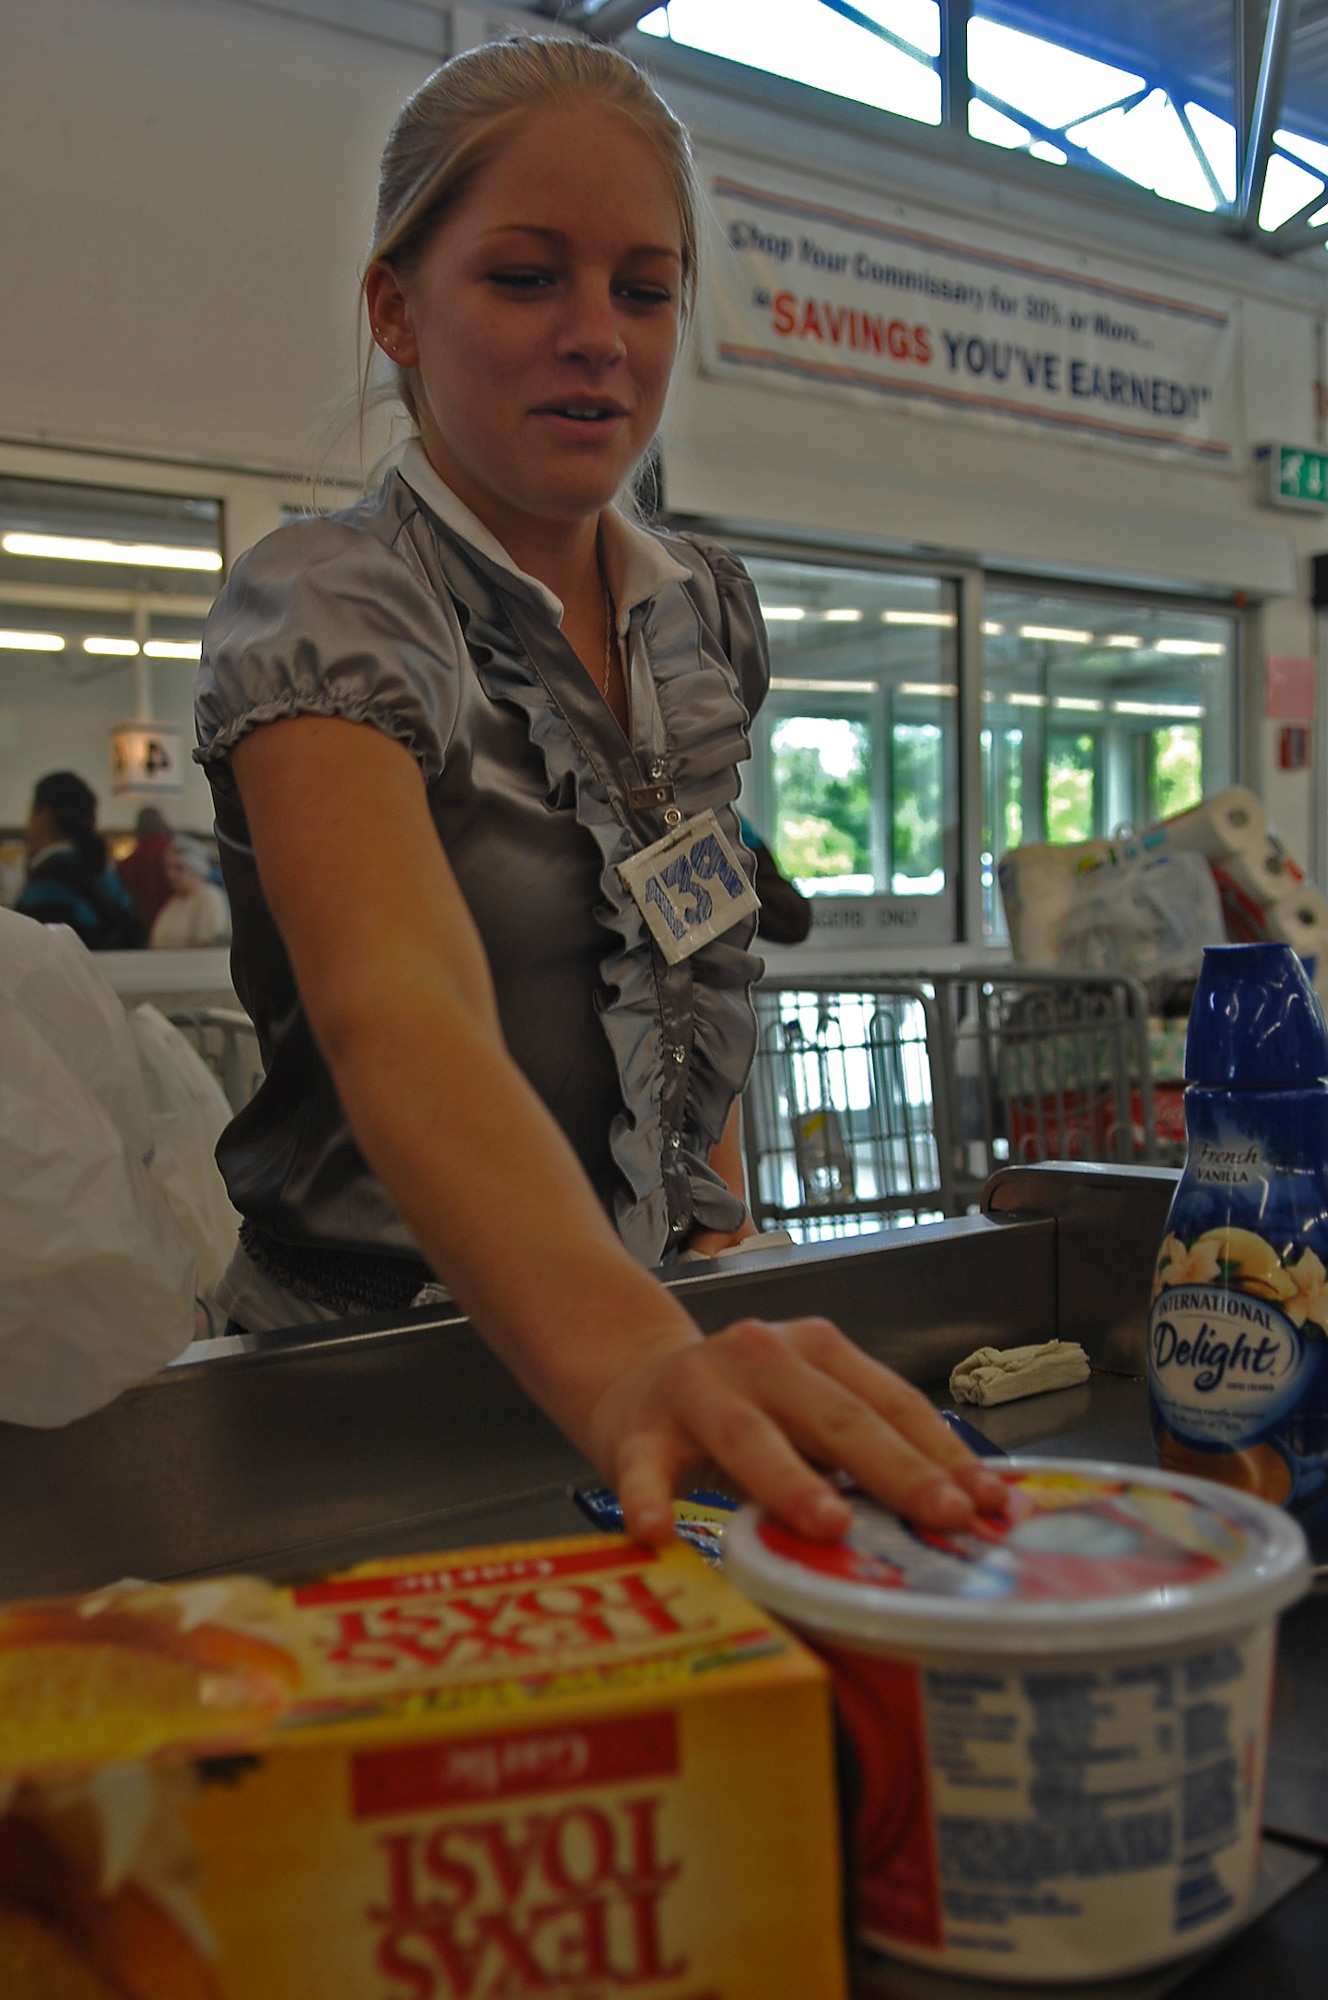 Chelsea Bachmann, commissary bagger, bags a customer's groceries, Ramstein Air Base, Germany, April 23, 2009. Commissary baggers are self-employed and work under a license agreement with the installation commander. (U.S. Air Force photo by Airman 1st Class Tony R. Ritter)